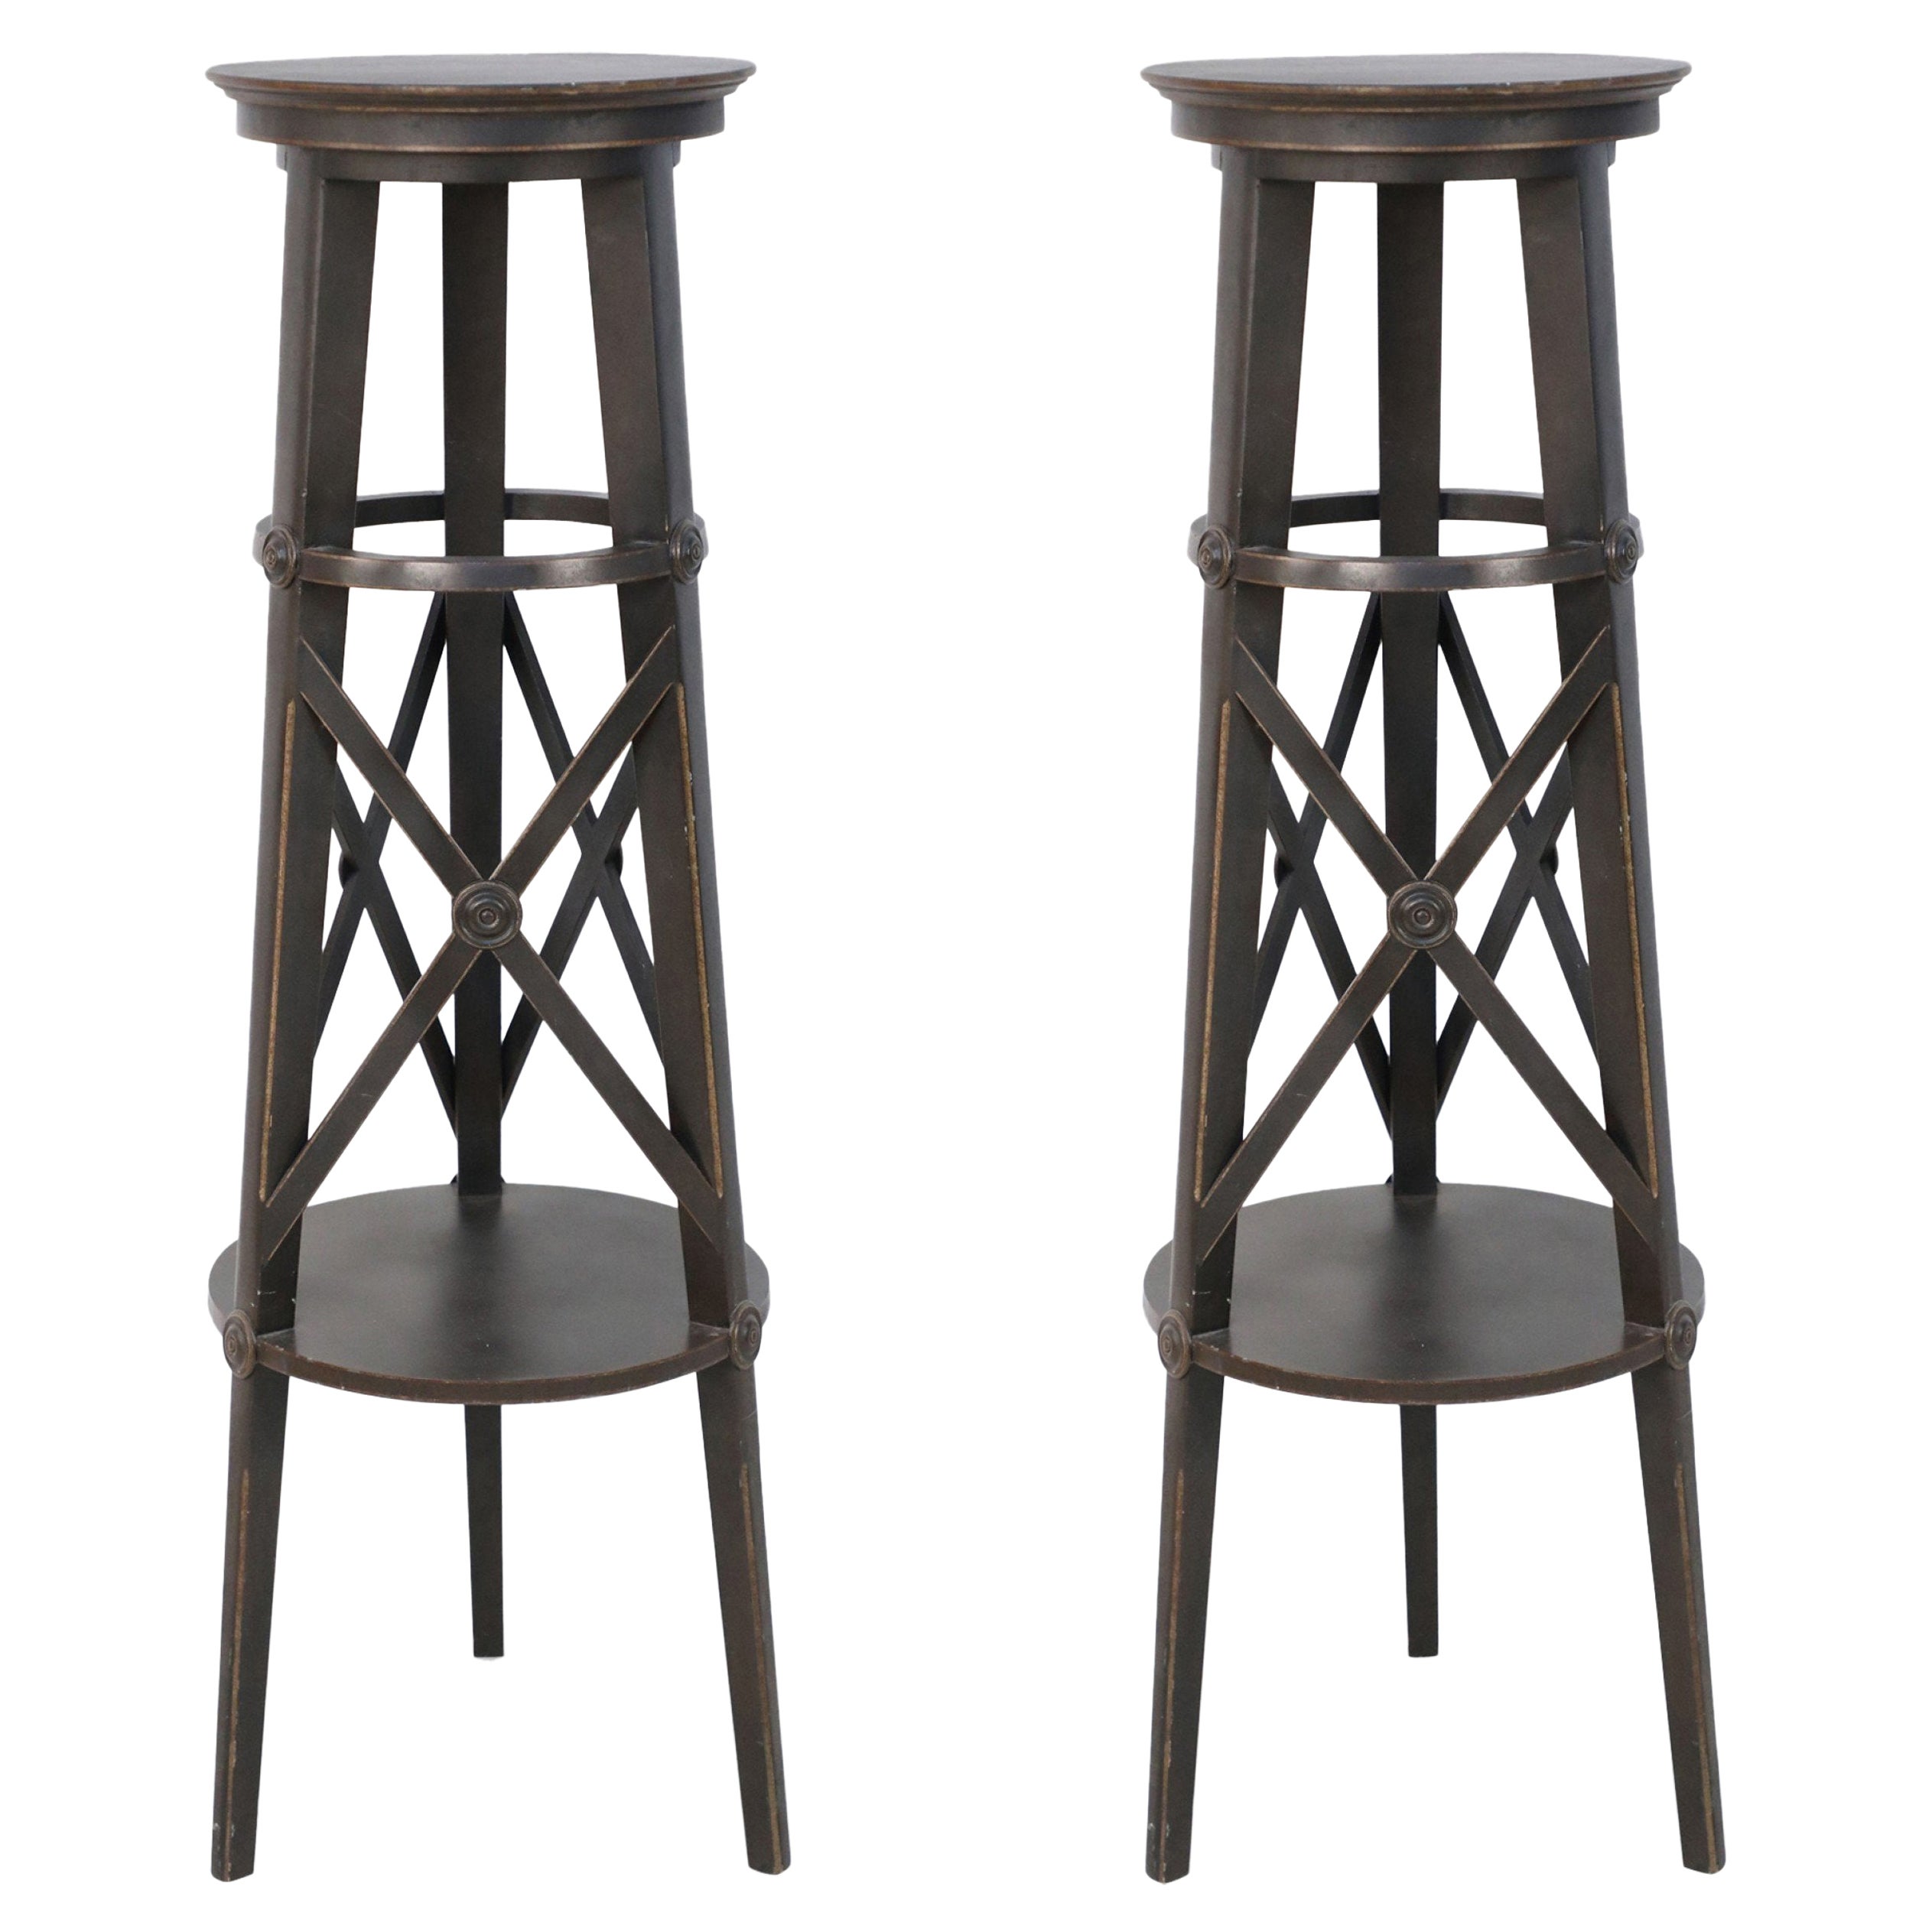 Pair of English Regency Style Tall Circular X-Support Pedestals For Sale